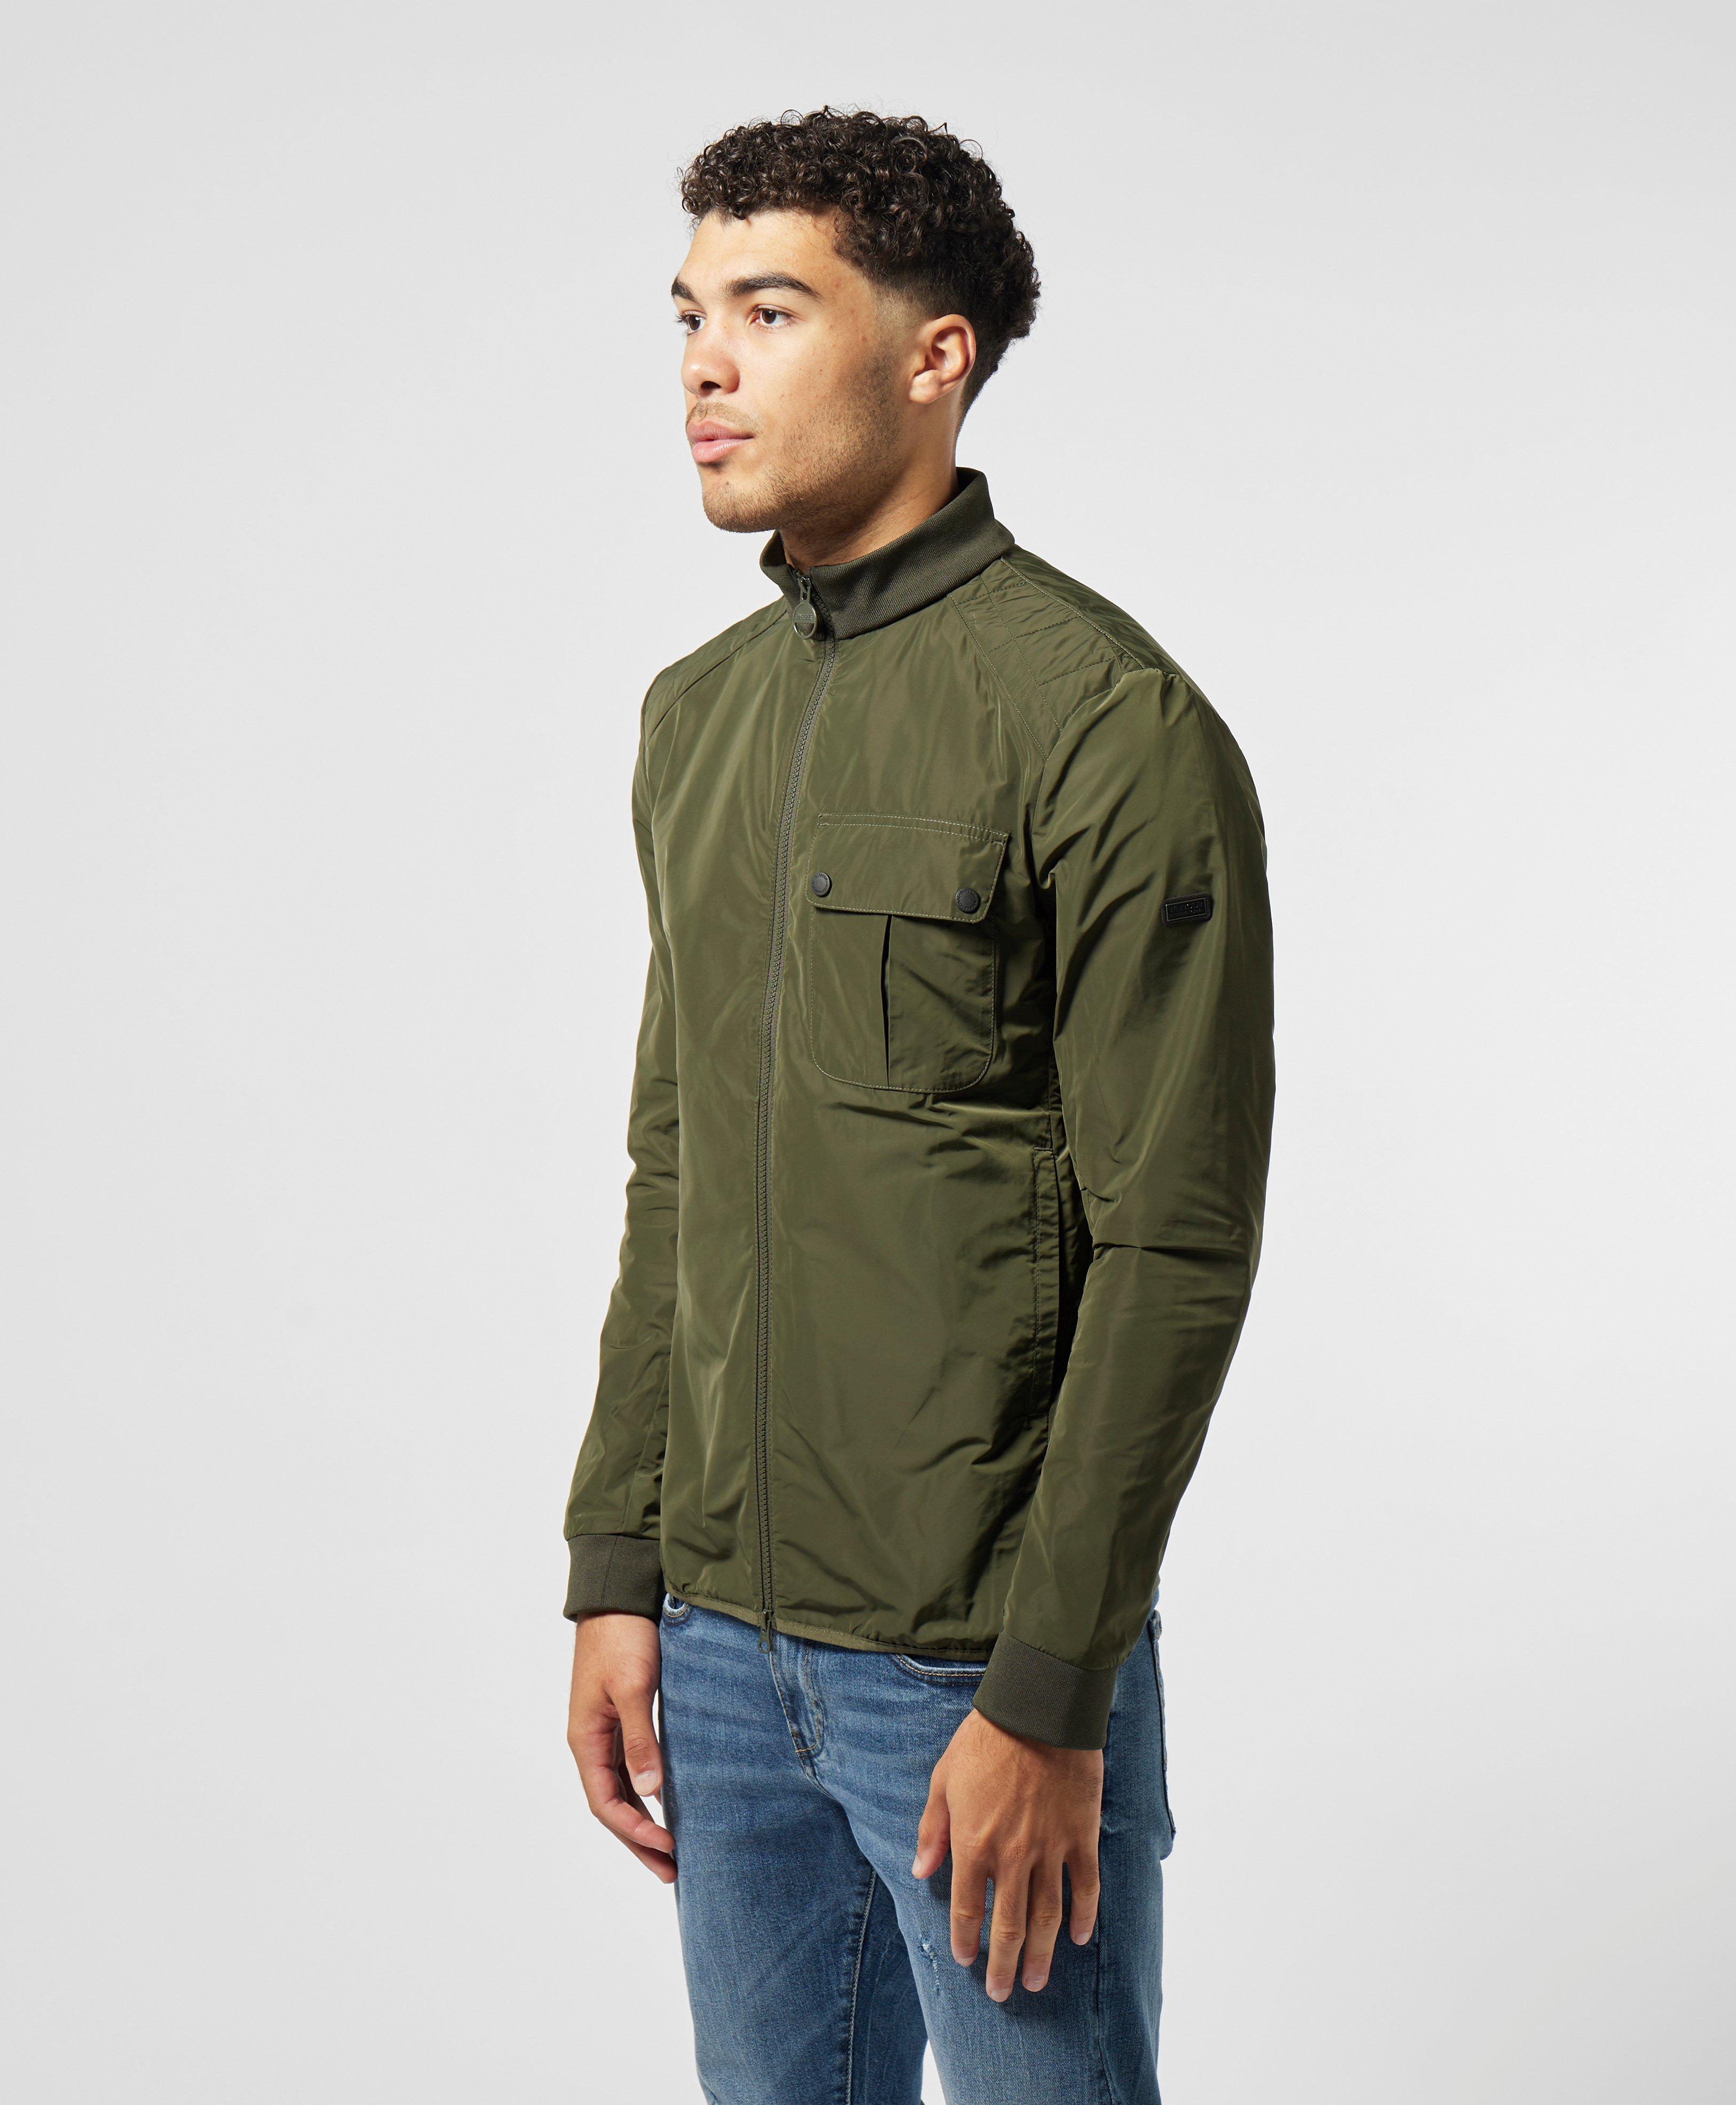 barbour international casual jackets